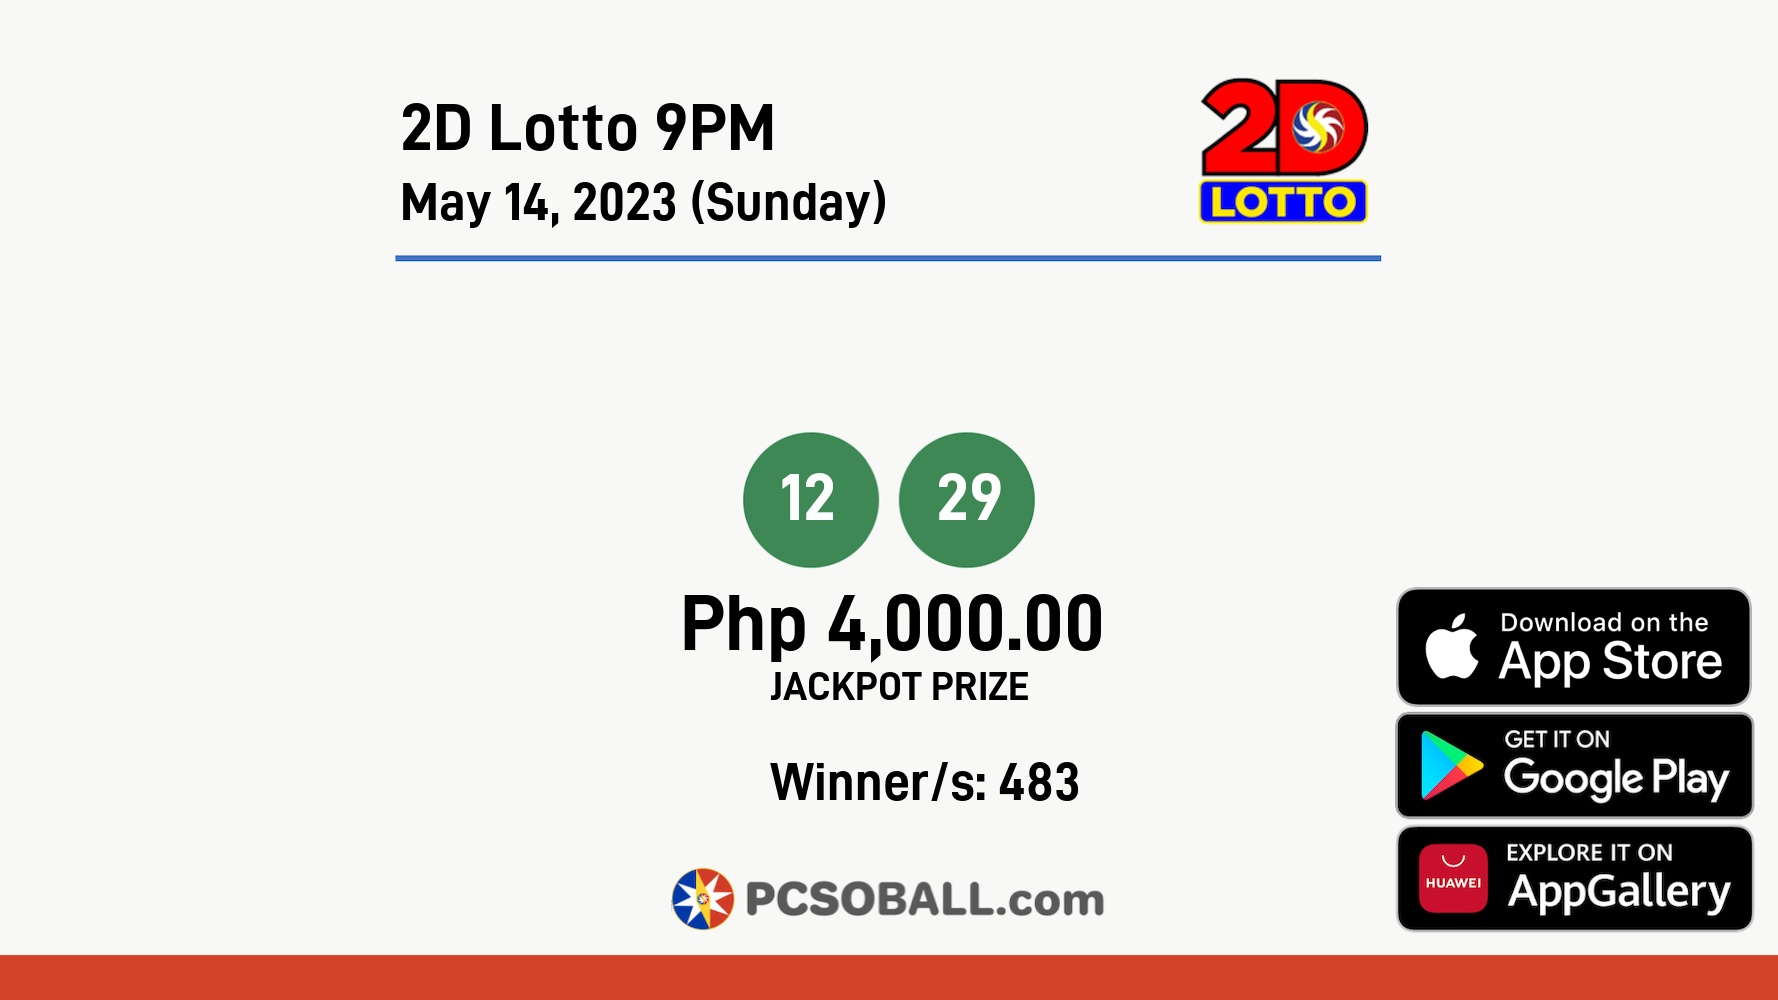 2D Lotto 9PM May 14, 2023 (Sunday) Result